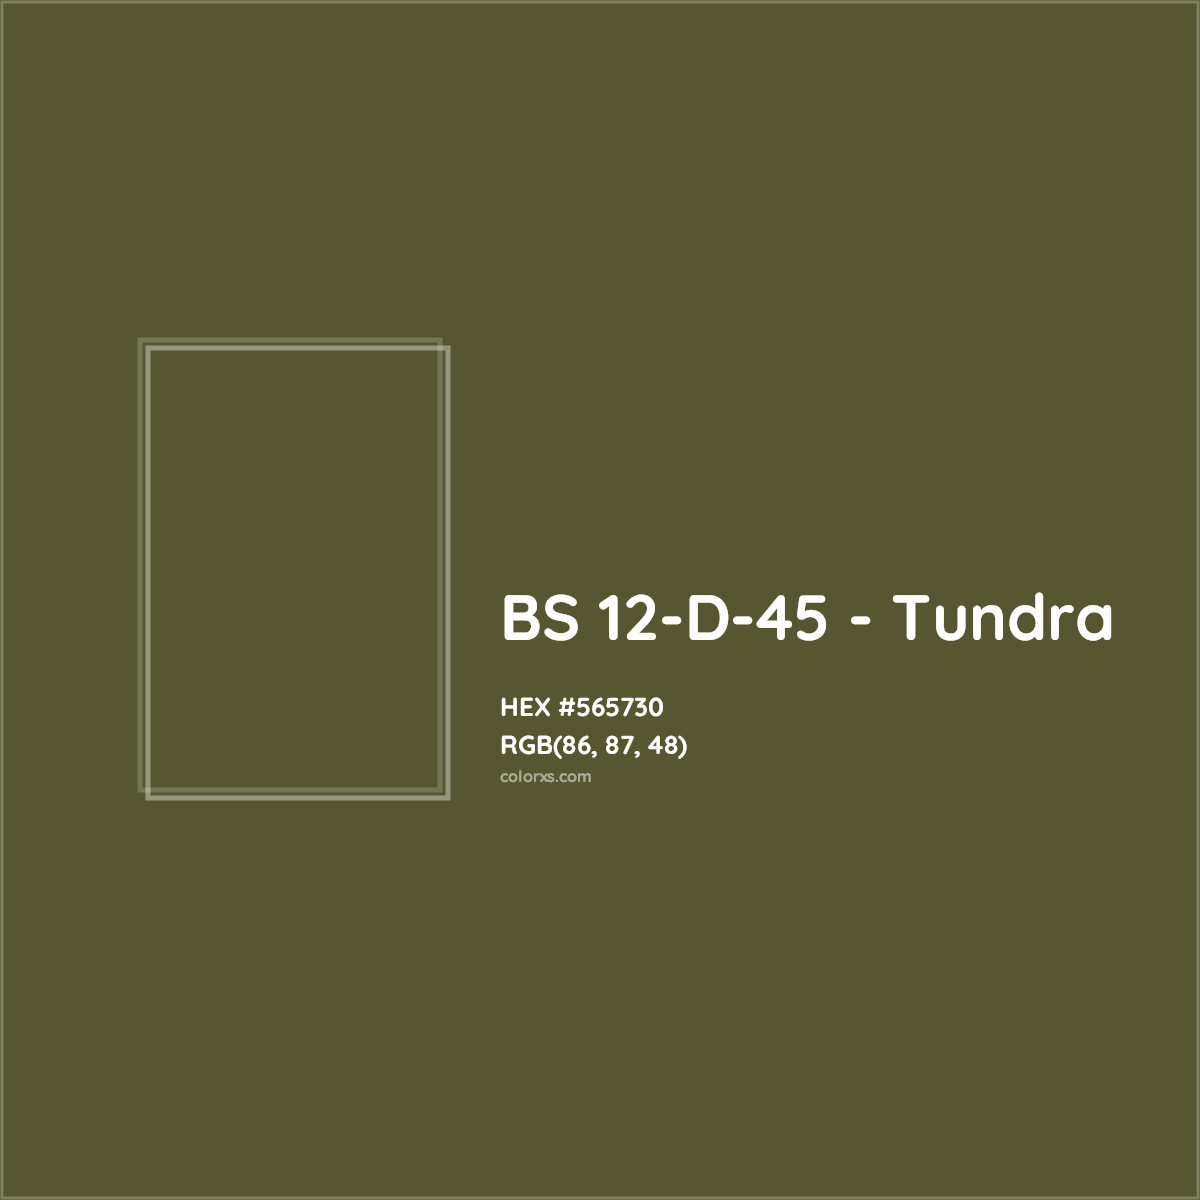 HEX #565730 BS 12-D-45 - Tundra CMS British Standard 4800 - Color Code